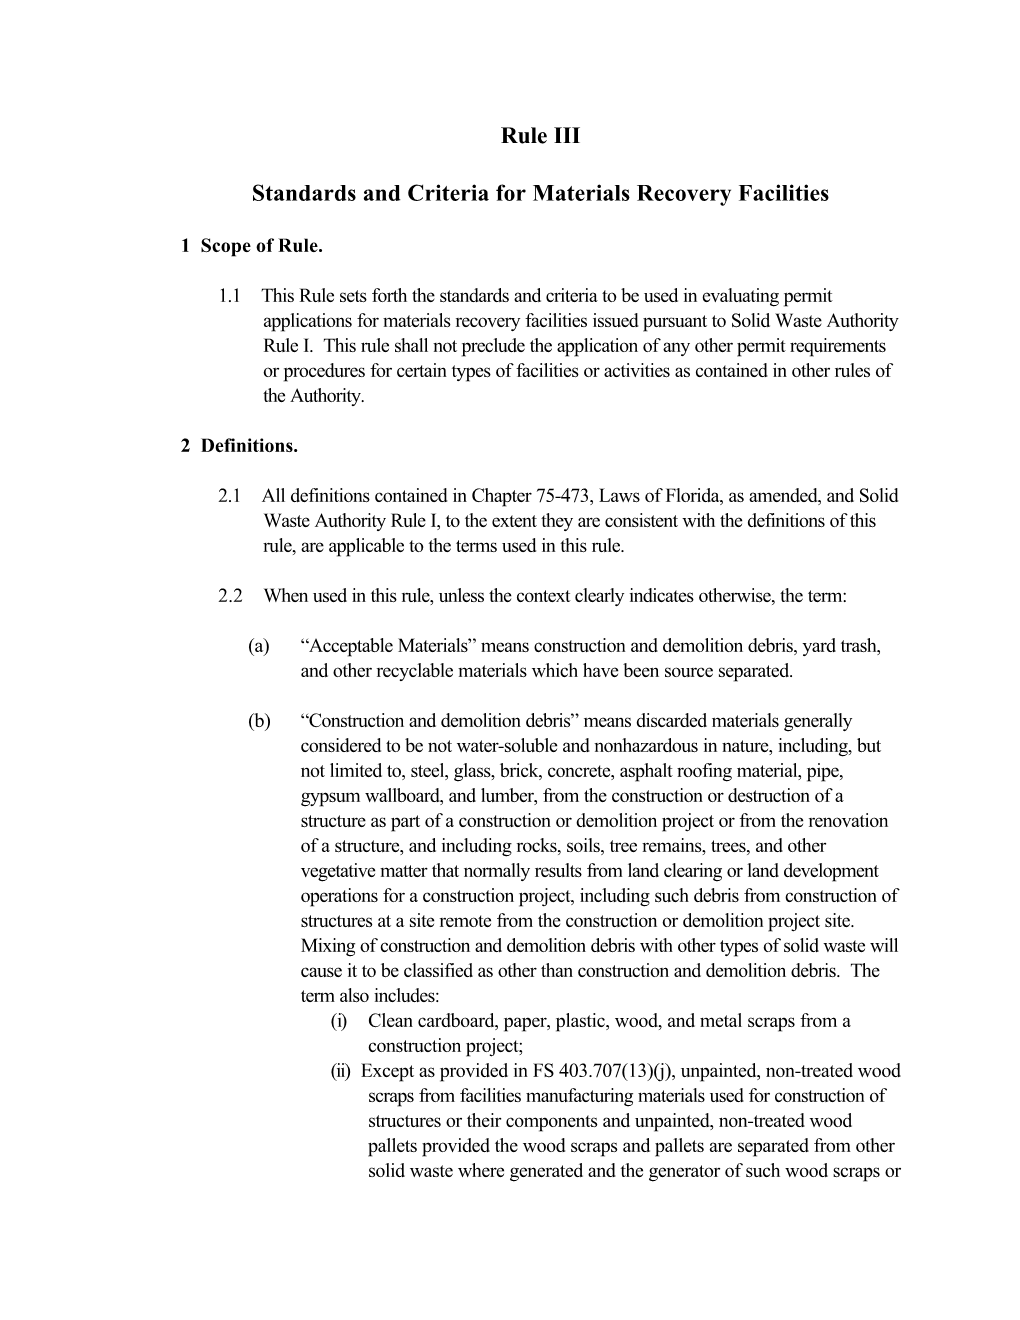 Rule III Standards and Criteria for Materials Recovery Facilities